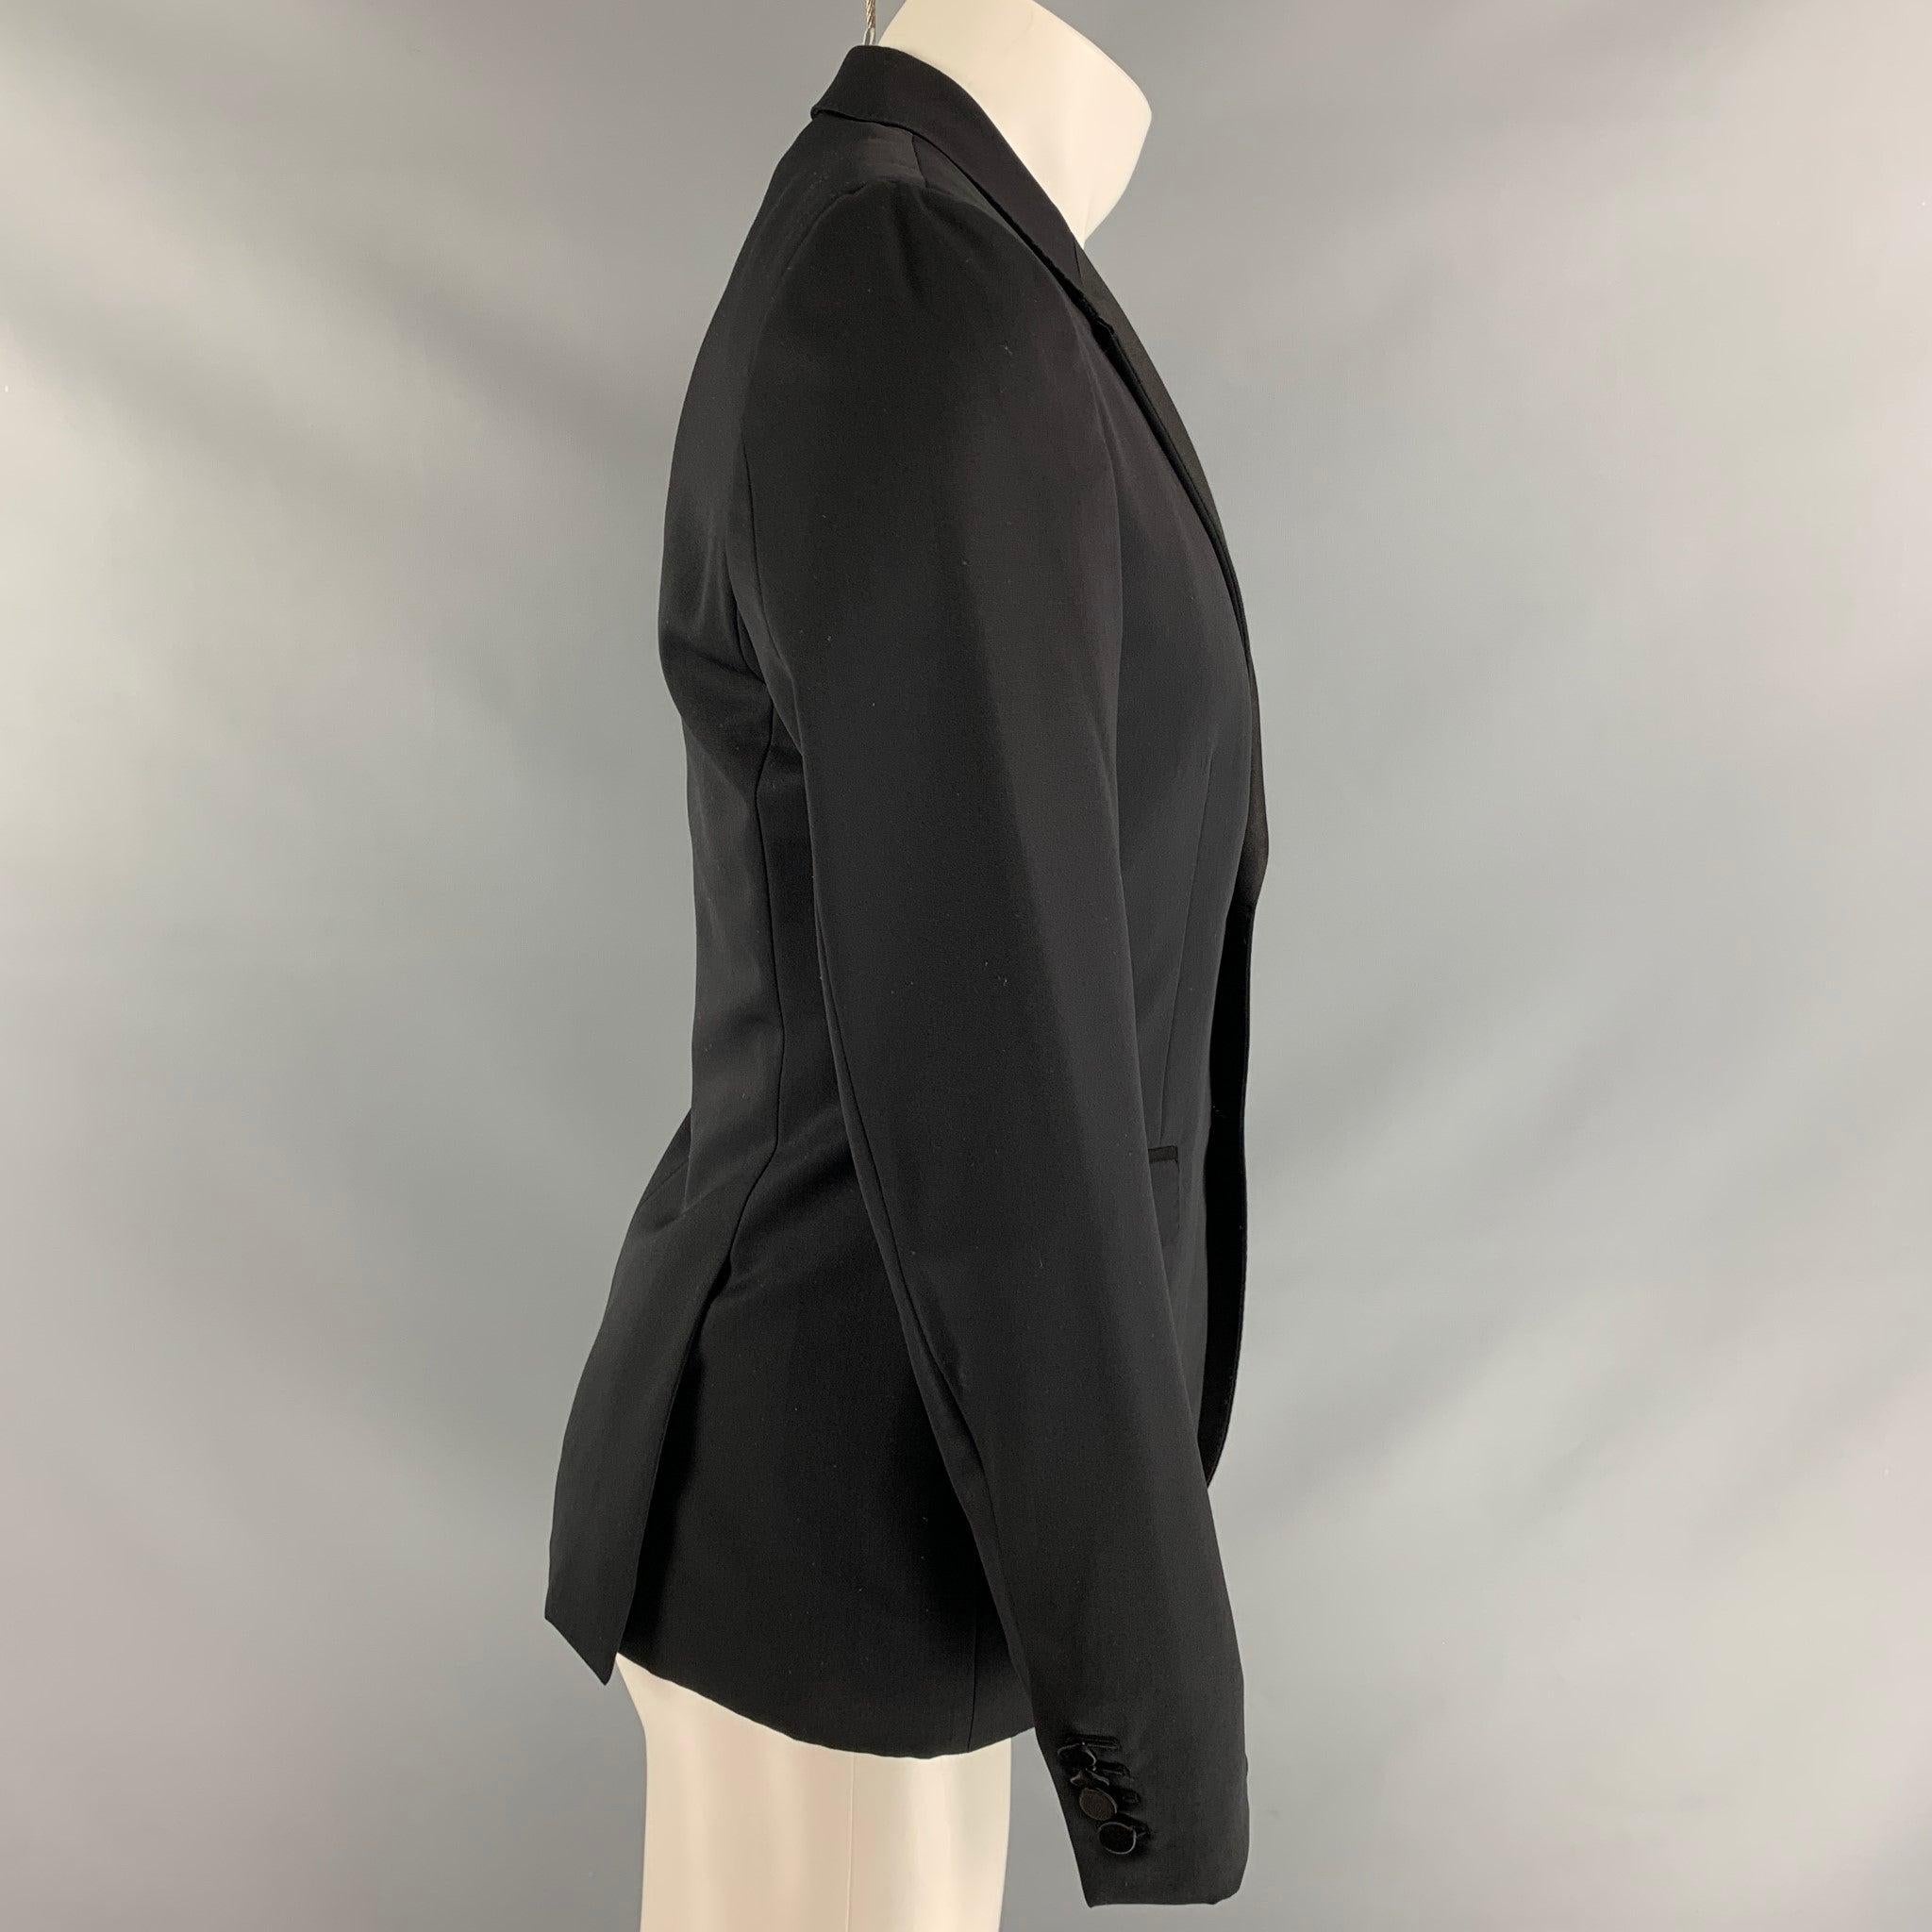 BURBERRY PRORSUM tuxedo sport coat, fully lined comes in a black virgin wool featuring a two button closure, flap pockets and notch lapel. Made in Italy. Excellent Pre-Owned Condition.  

Marked:   48 

Measurements: 
 
Shoulder: 16.5 inChest: 40